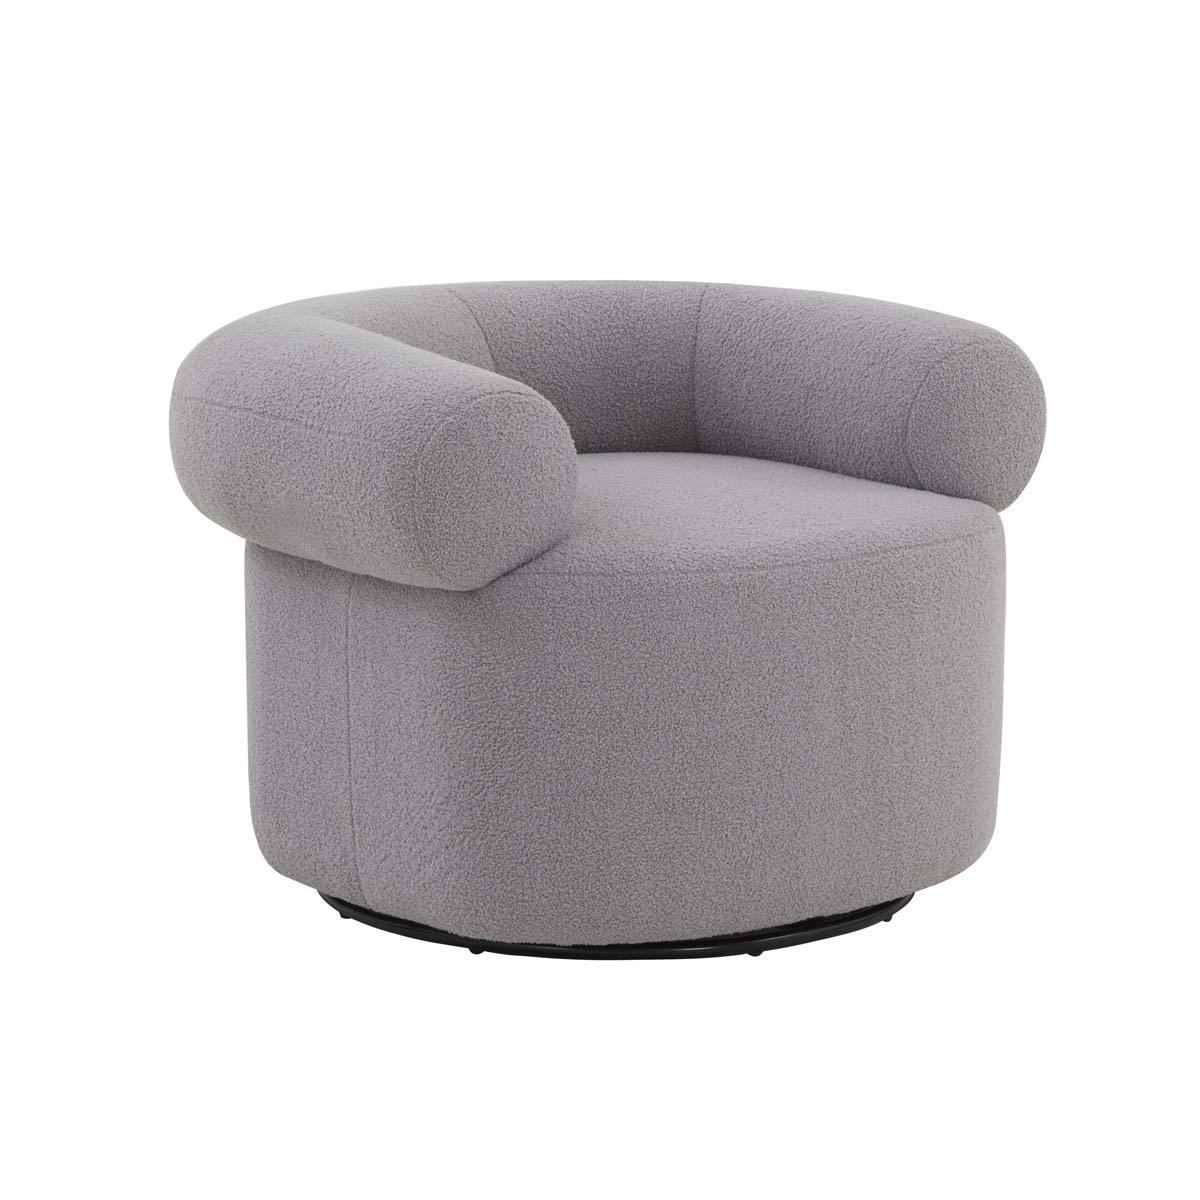 Safavieh Couture Sadie Swivel Accent Chair - Light Grey